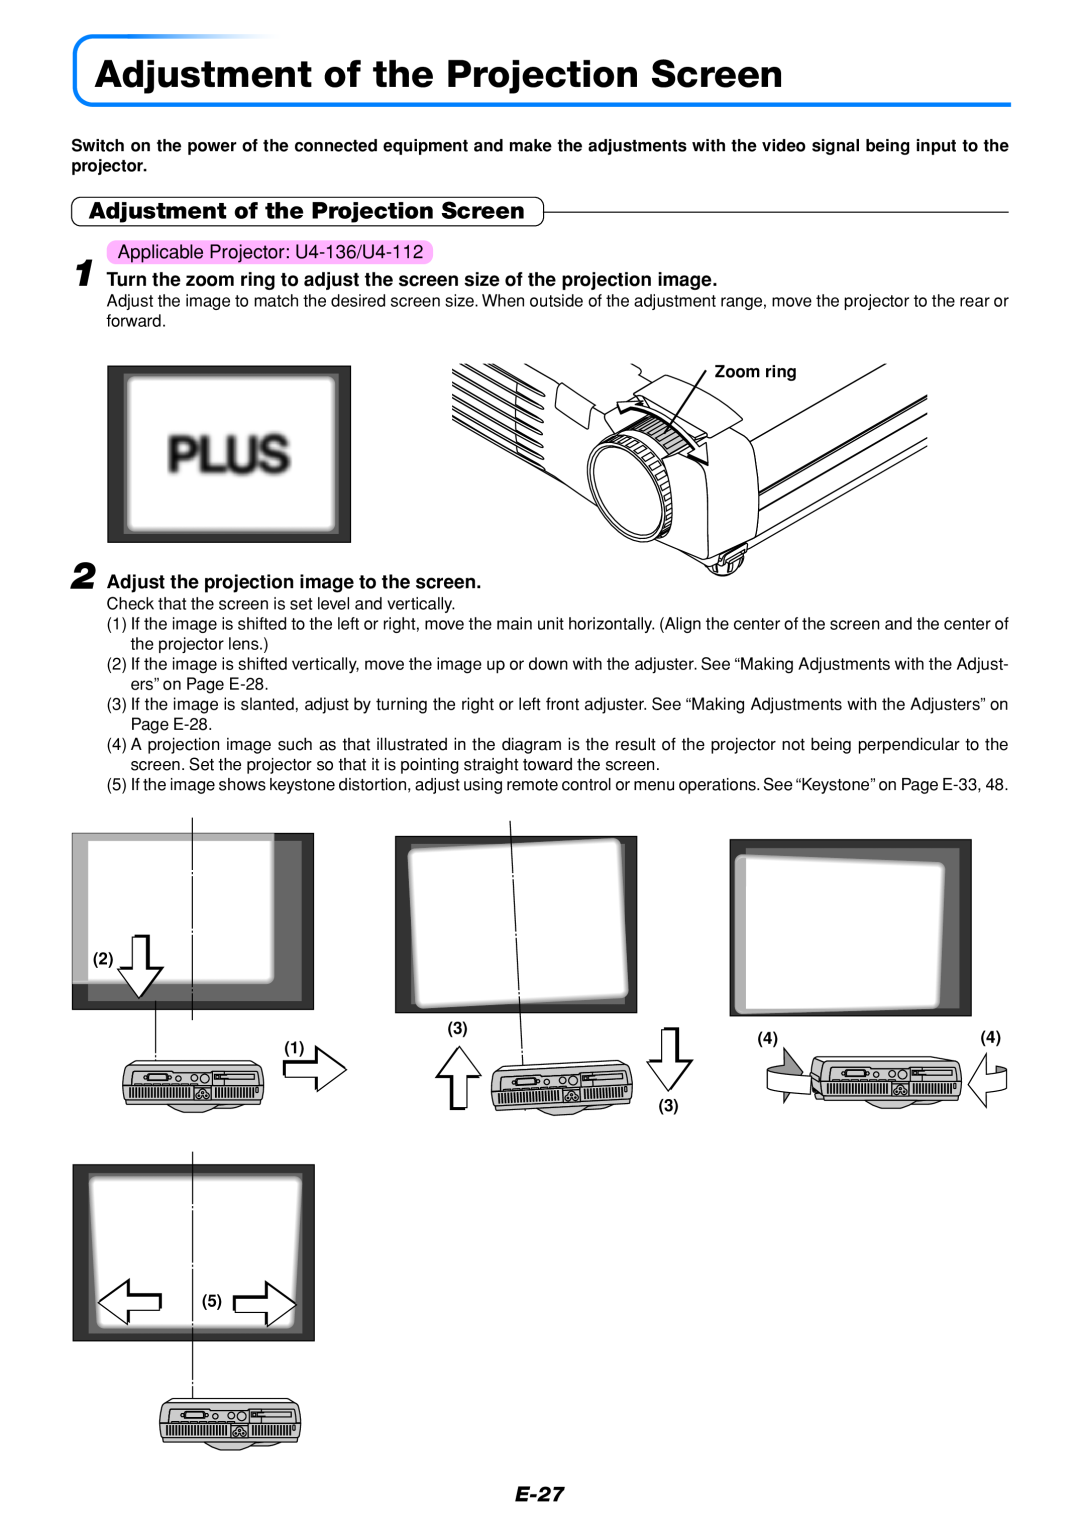 PLUS Vision U4-111, U4-136 Adjustment of the Projection Screen, E-27, Adjust the projection image to the screen, Zoom ring 